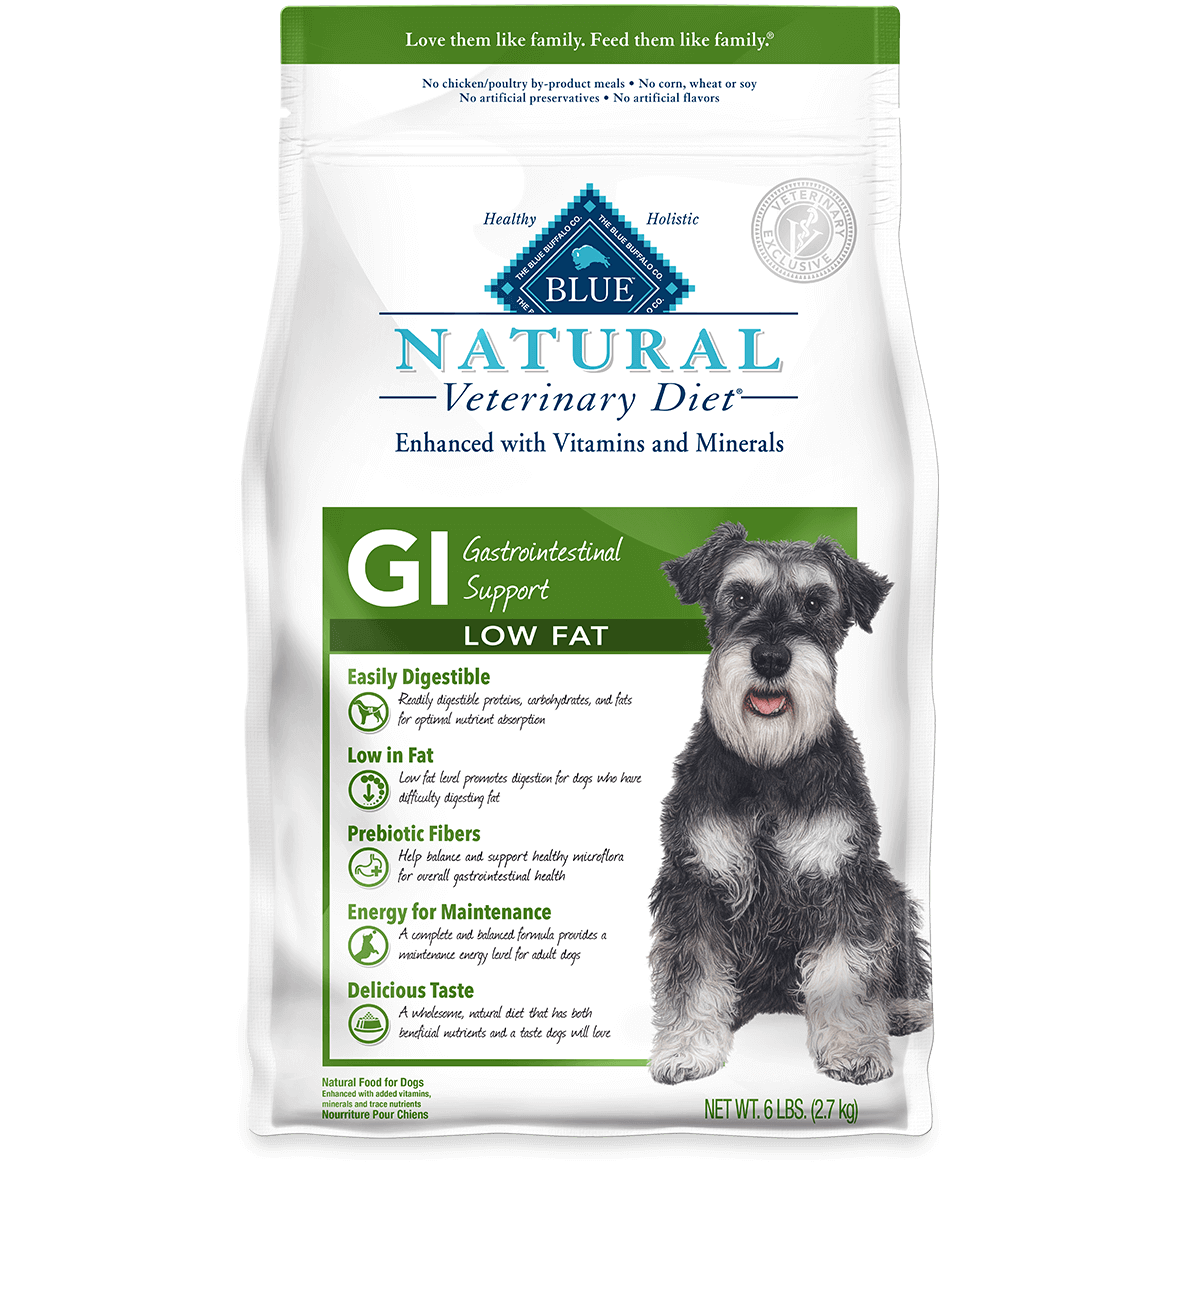 Blue Buffalo BLUE Natural Veterinary Diet GI Gastrointestinal Support Low Fat Dry Dog Food